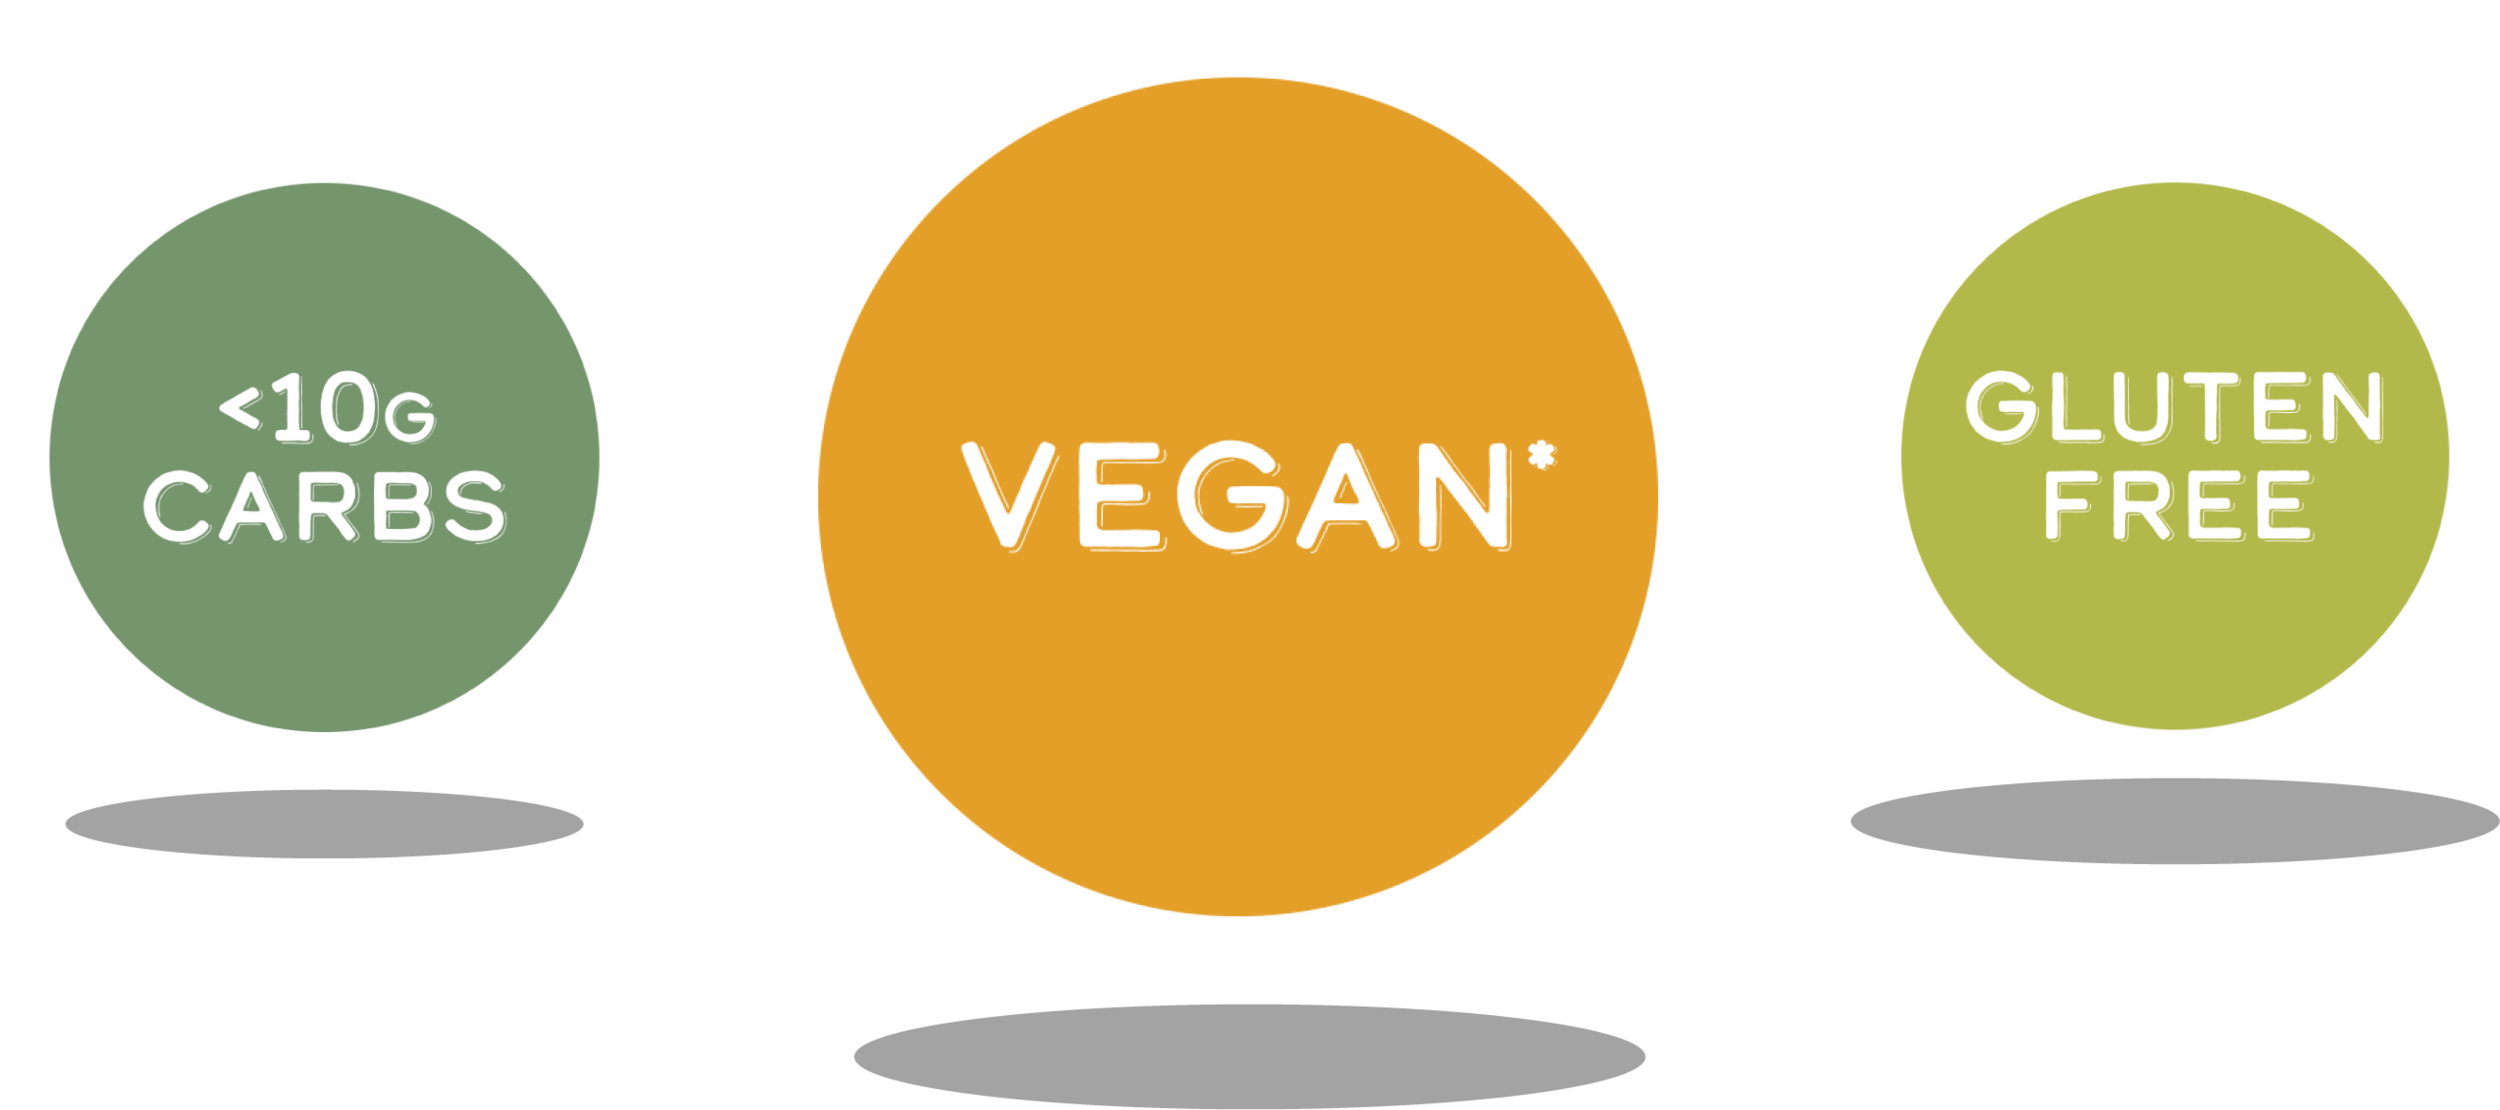  It is our goal to have products that exclude all forms of exploitation of, and cruelty to, animals for food, clothing, or any other purpose. With the exception of 3 of our sauces that contain honey, our line of products fall within the definition of